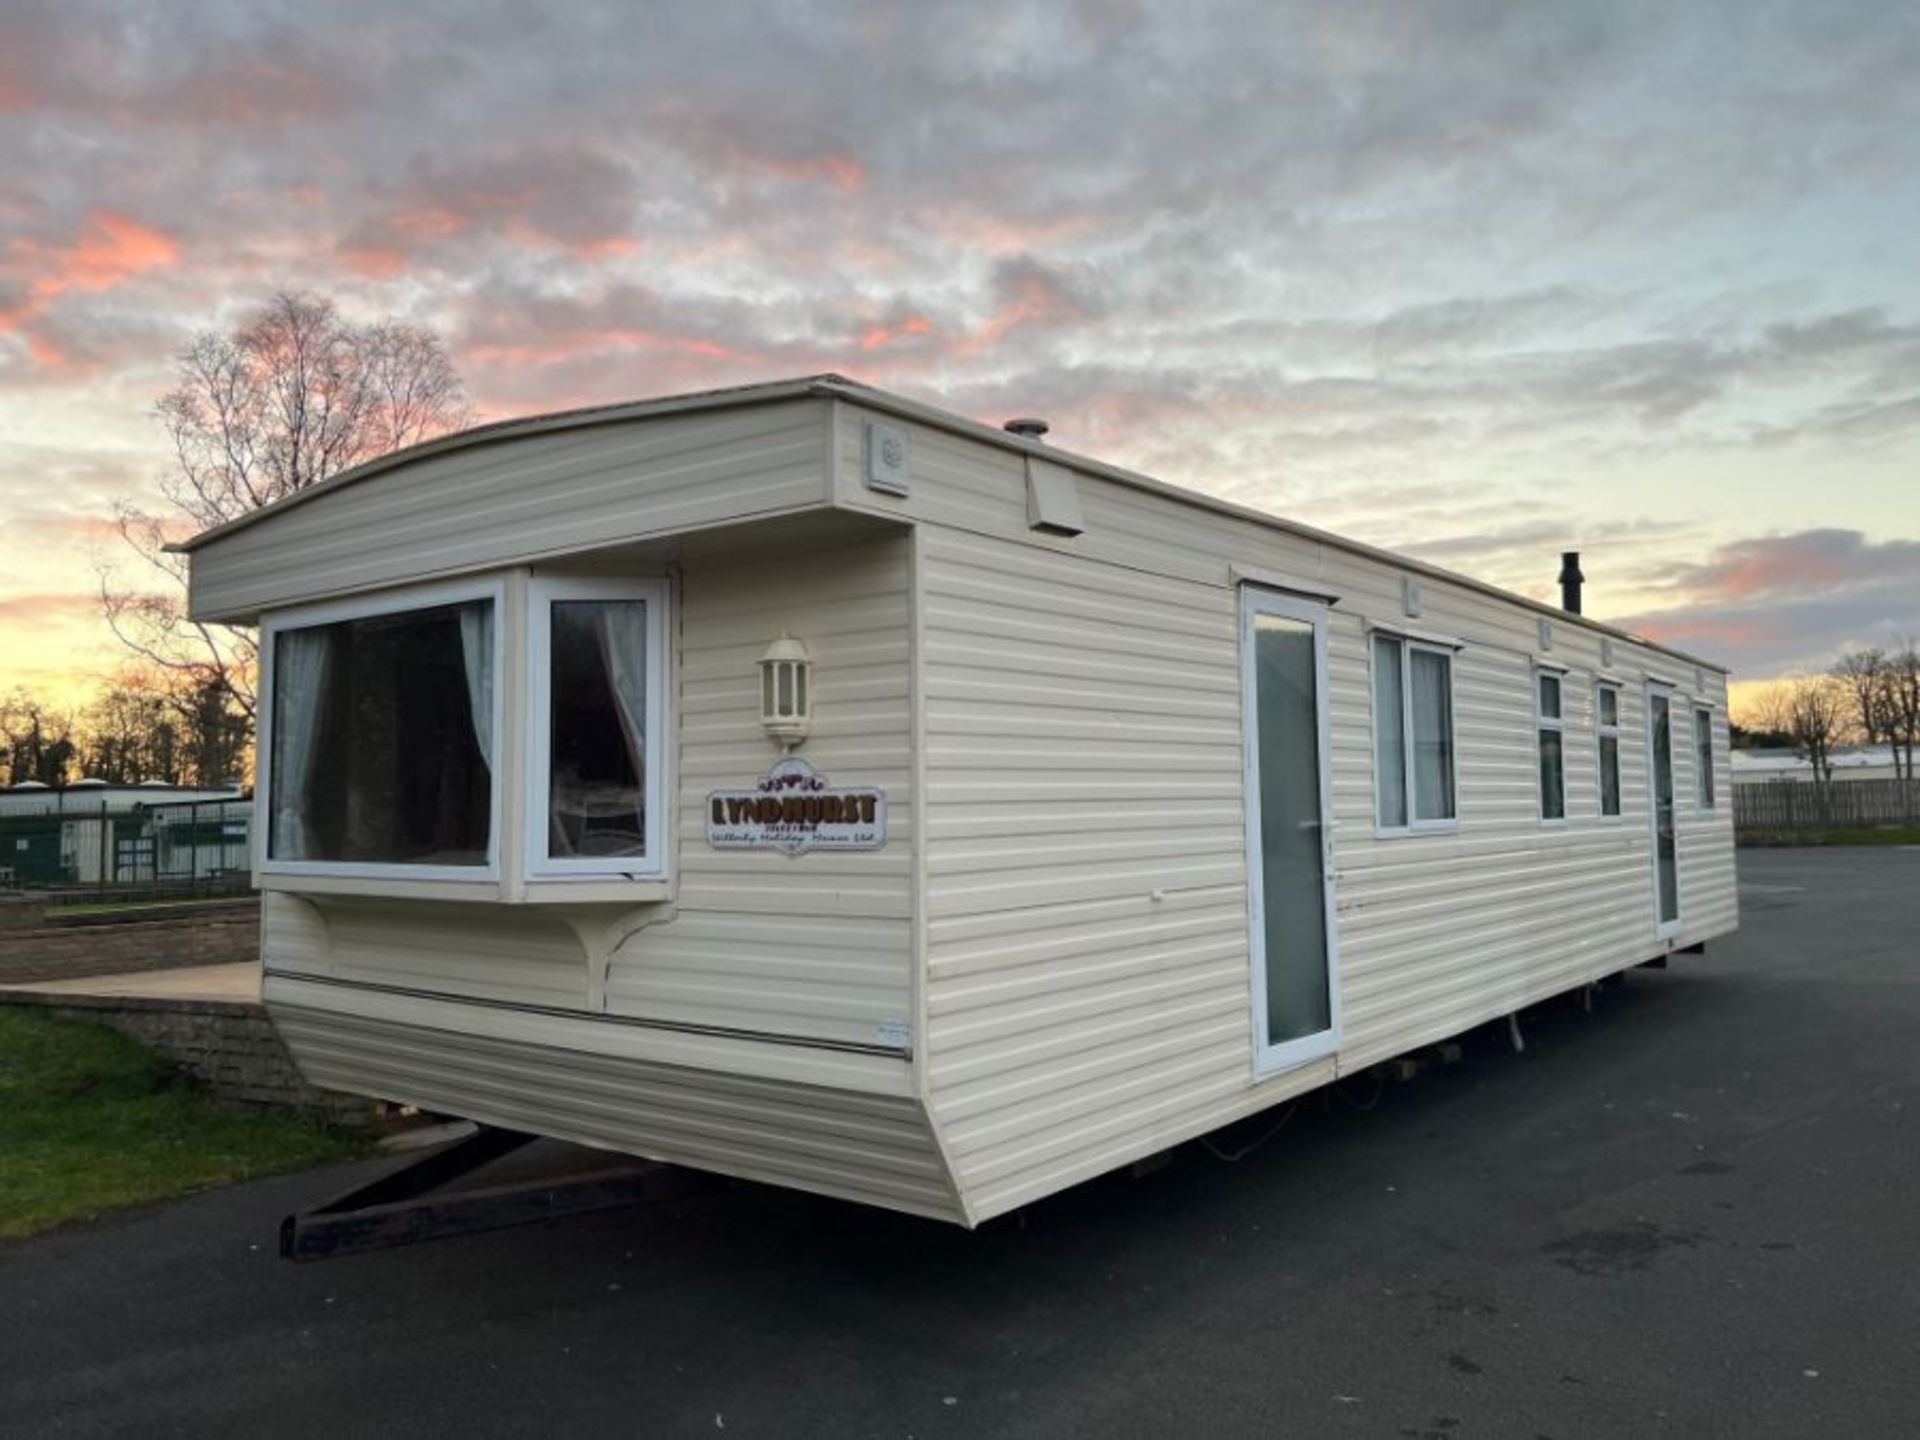 WILLERBY LYNDHURST 37FT X 12FT, 3 BEDROOM STATIC CARAVAN DOUBLE GLAZED & CENTRAL HEATING - LOCATED